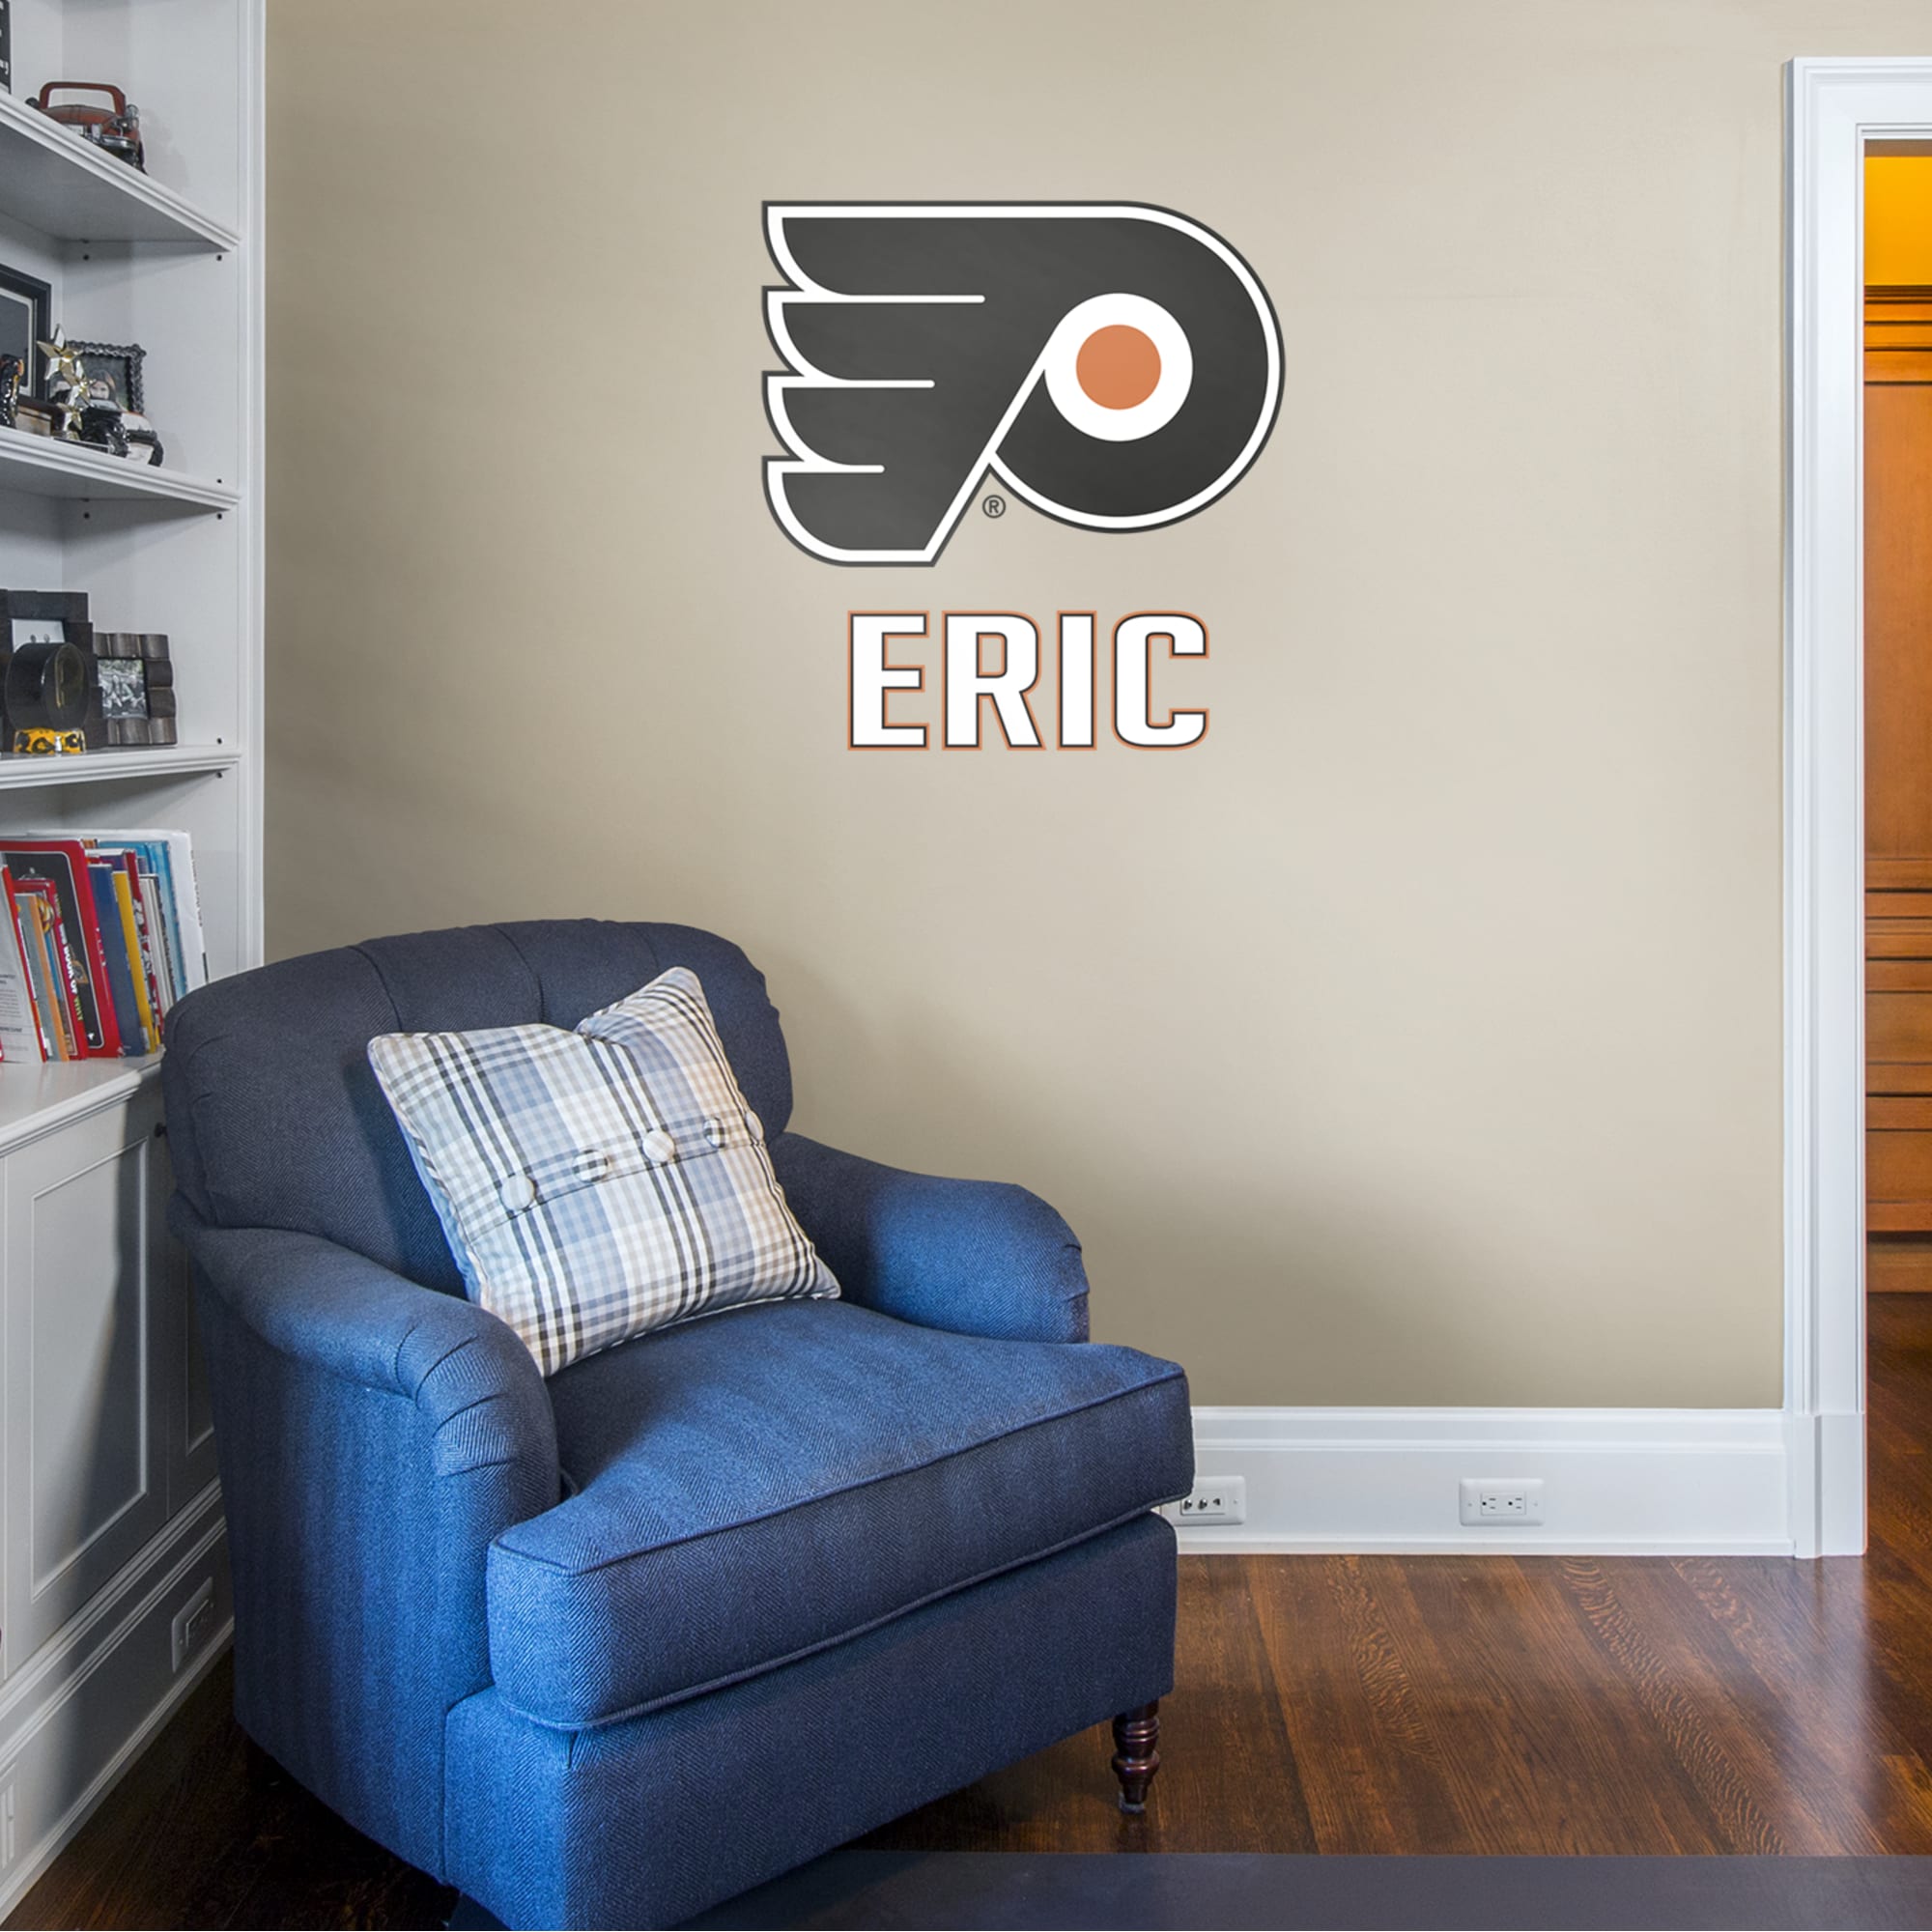 Philadelphia Flyers: Stacked Personalized Name - Officially Licensed NHL Transfer Decal in White (39.5"W x 52"H) by Fathead | Vi